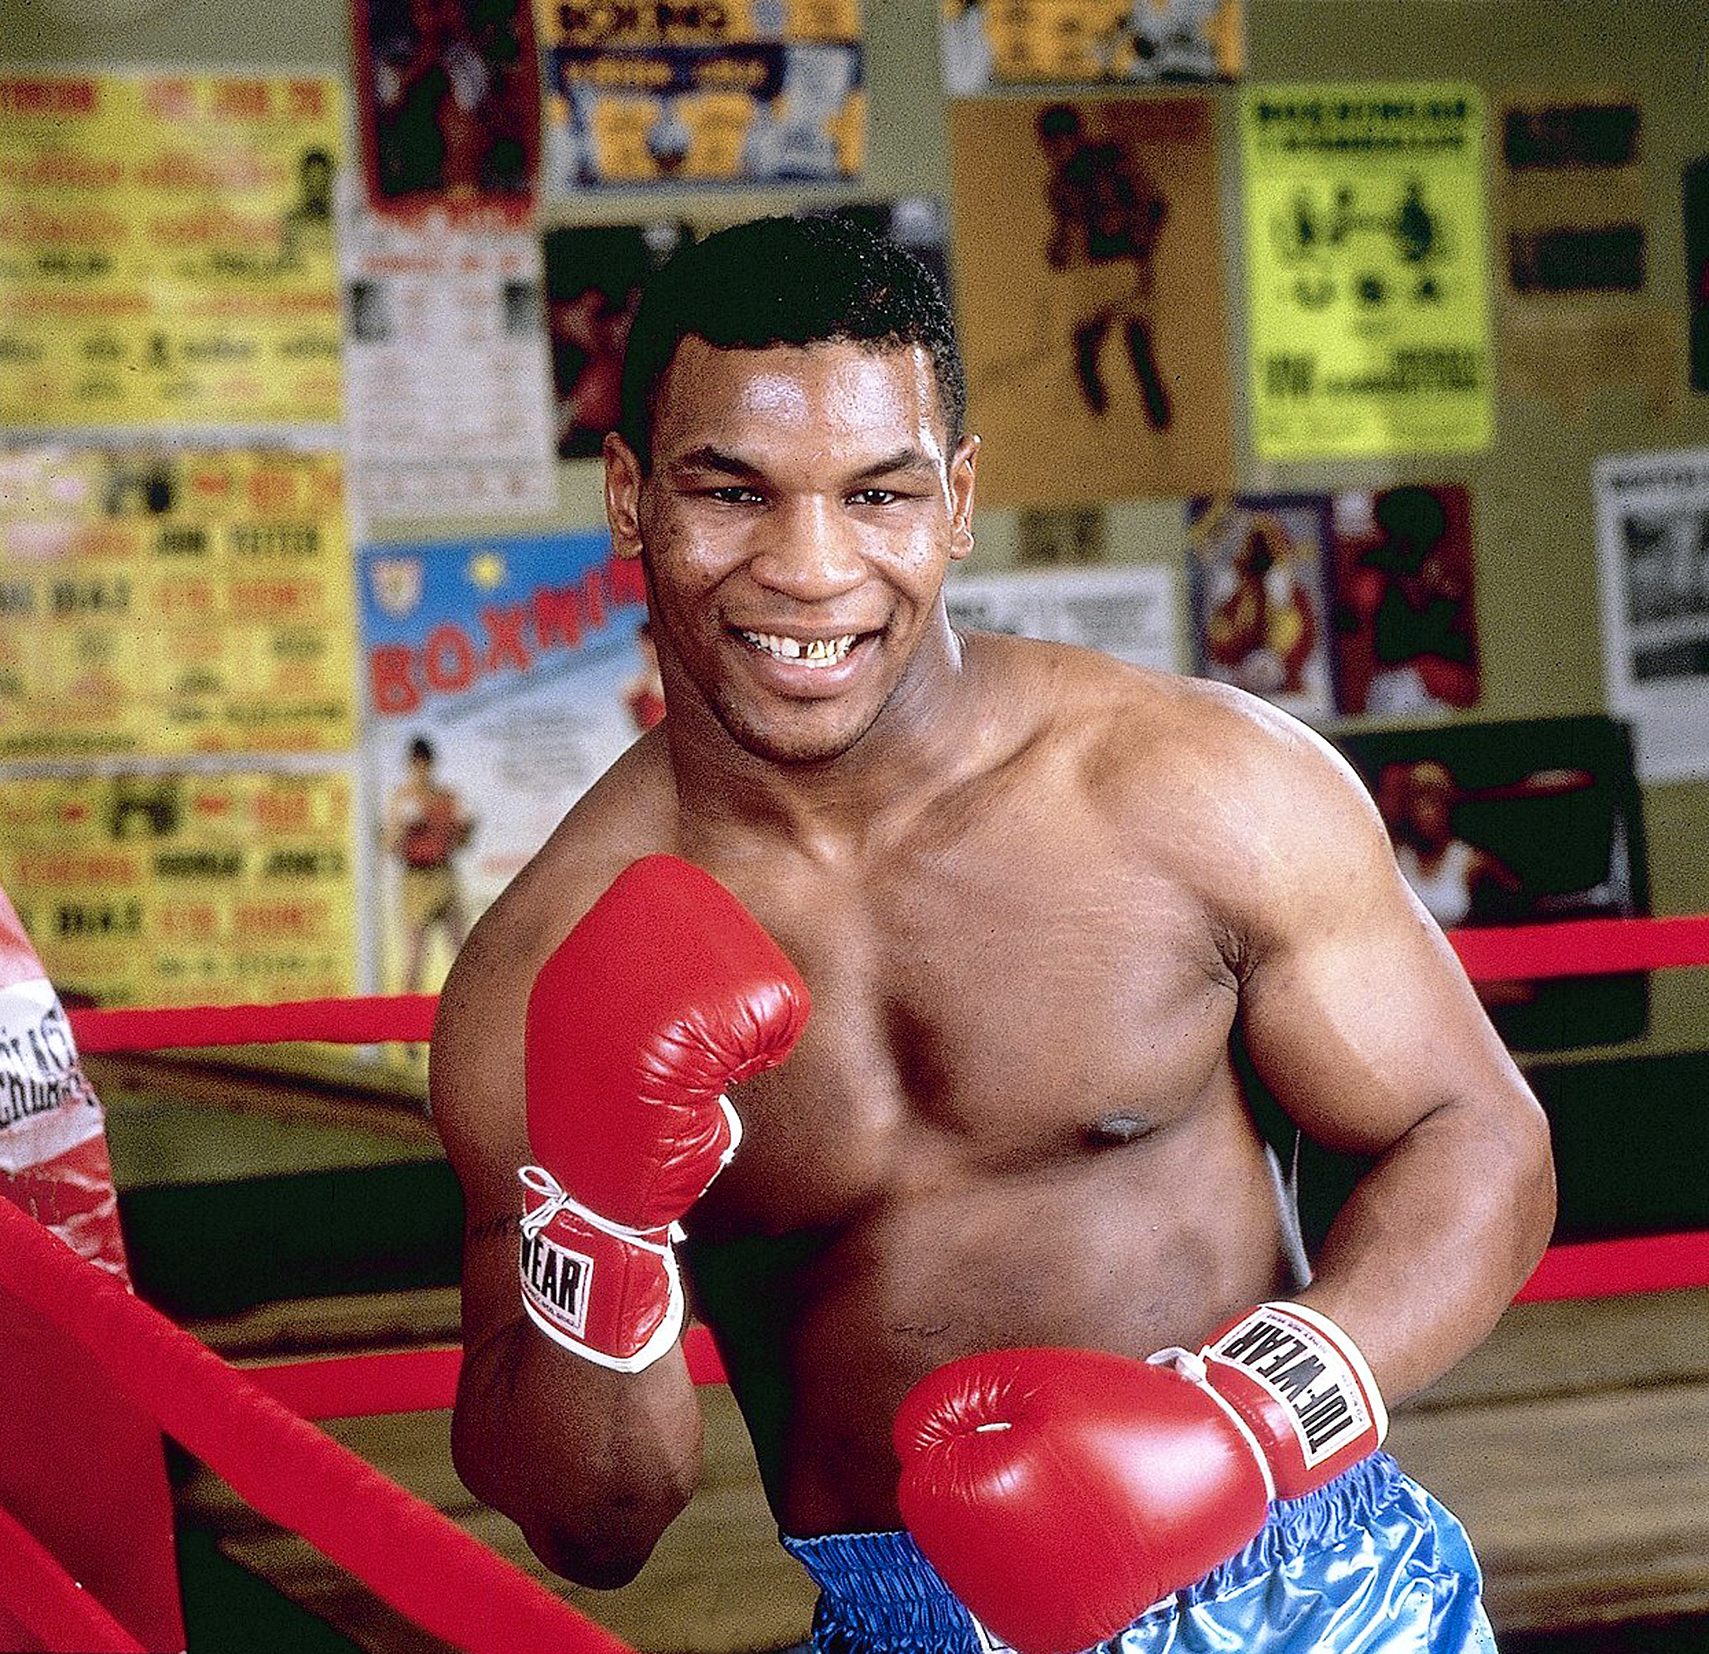 Mike Tyson and Evander Holyfield were separated in violent sparring